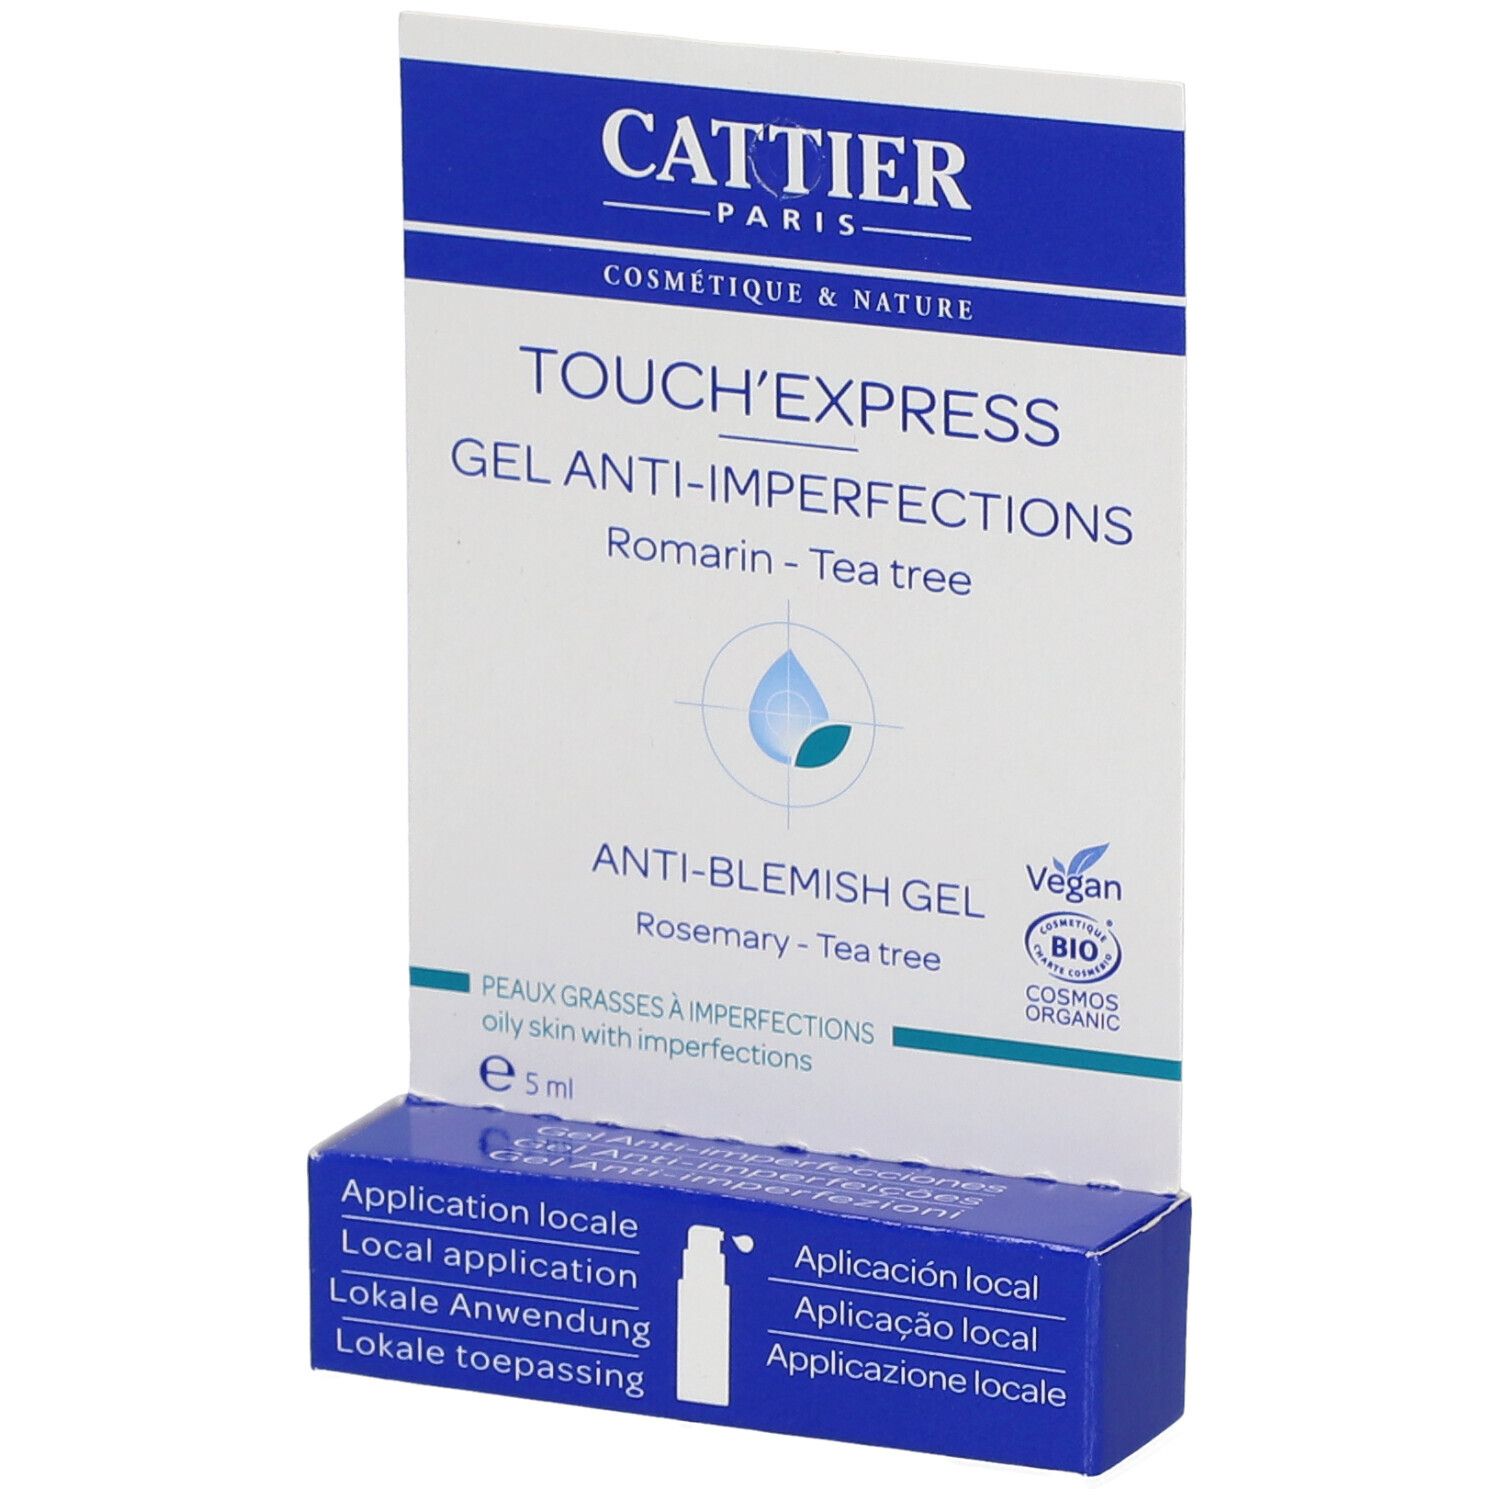 Cattier Touch'Express Gel anti-imperfections